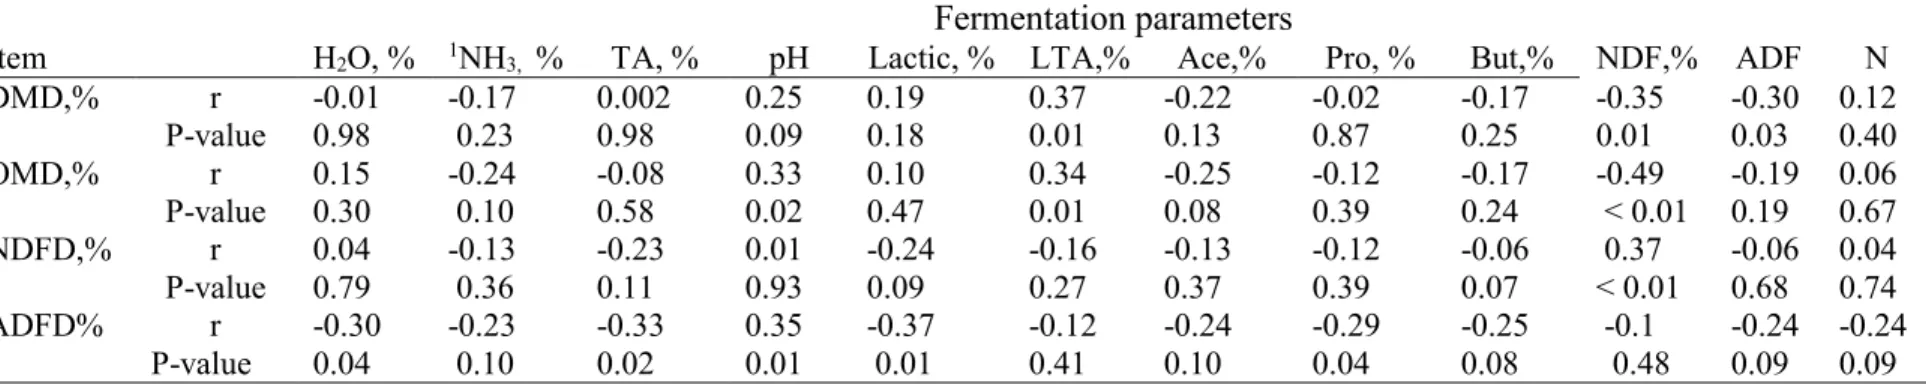 Table 3.2: Pearson correlation coefficients between fermentation characteristics and digestibility measurements of alfalfa  silage  in gestating sheep 